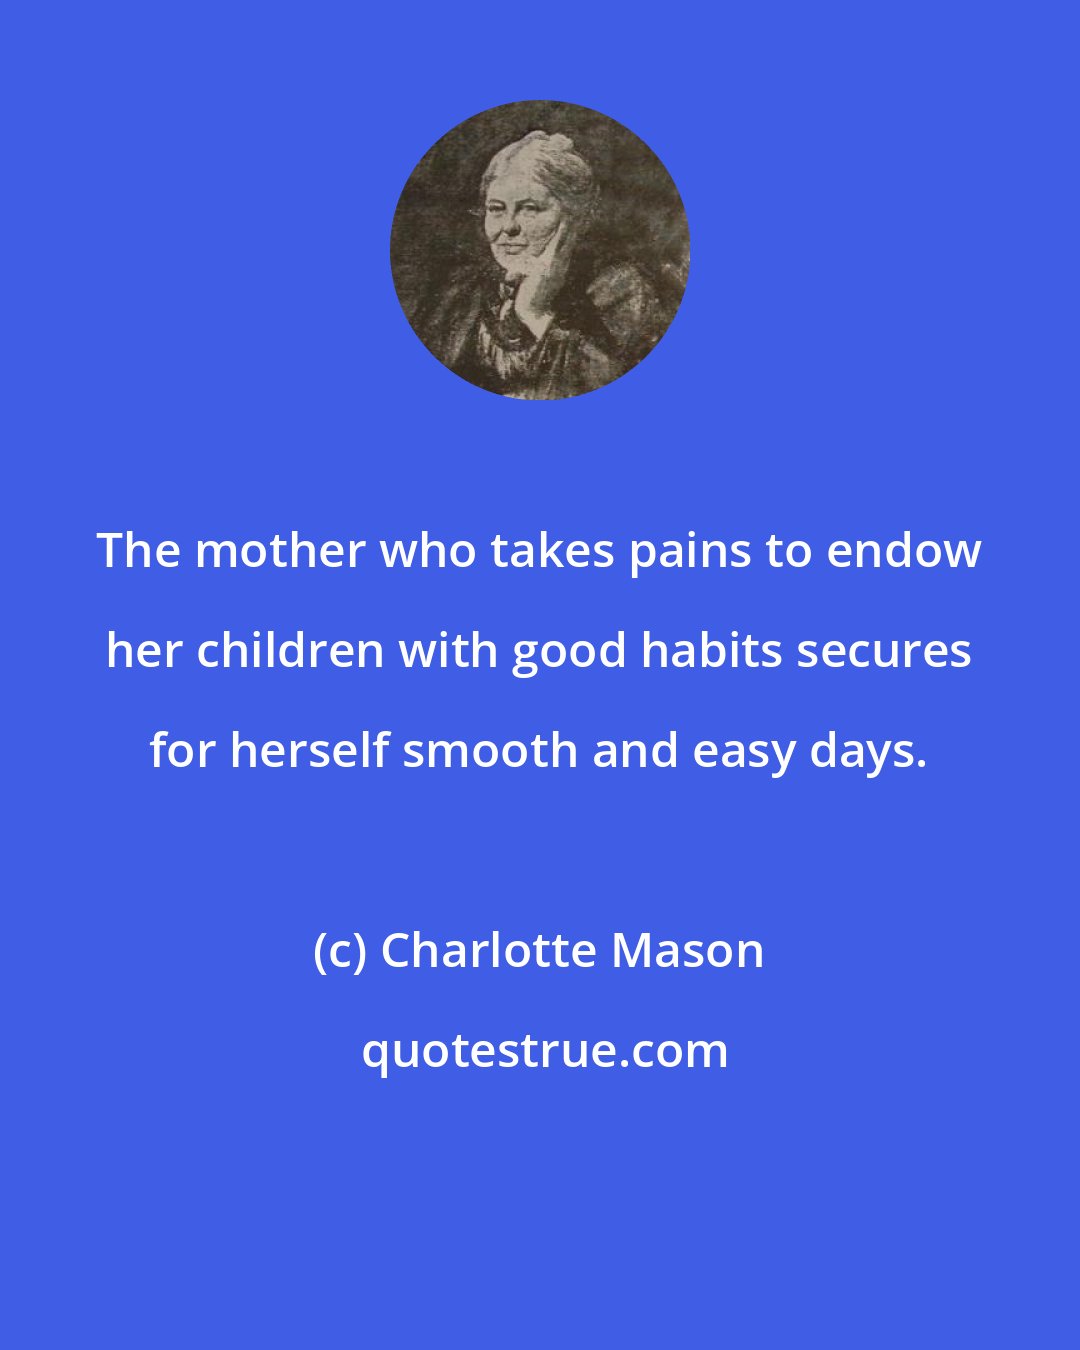 Charlotte Mason: The mother who takes pains to endow her children with good habits secures for herself smooth and easy days.